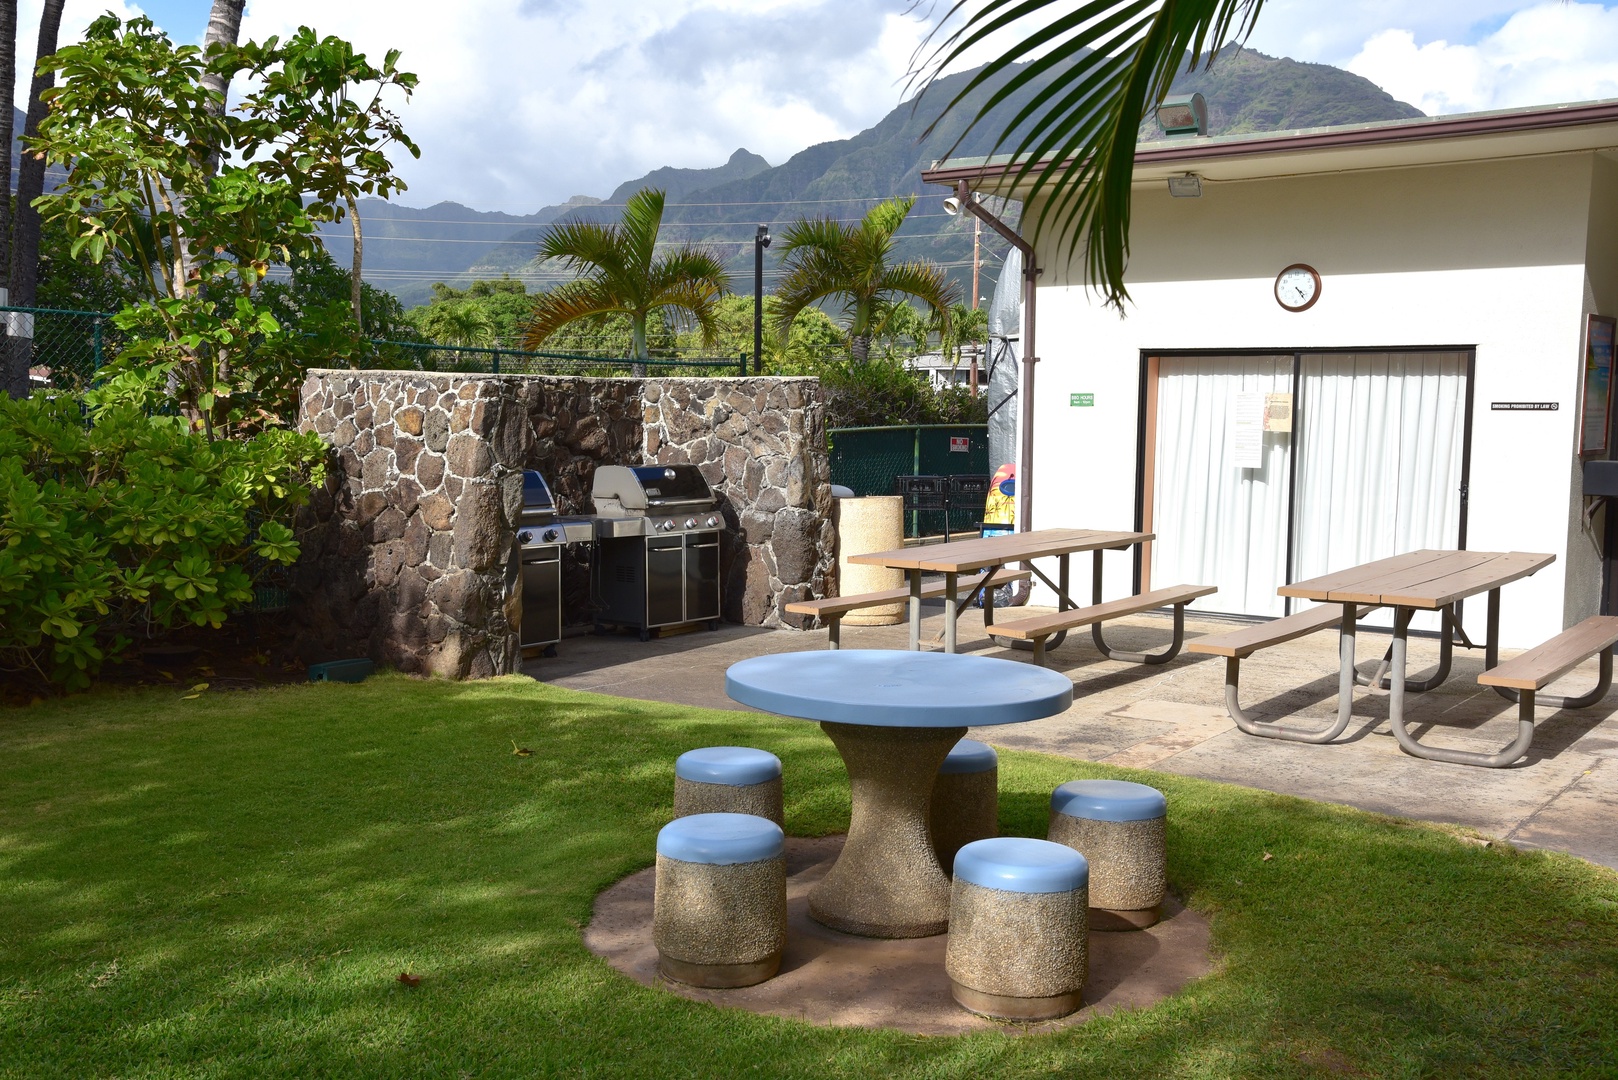 Waianae Vacation Rentals, Makaha - Hawaiian Princess - 305 - The outdoor picnic area with BBQ grills for guests to use.